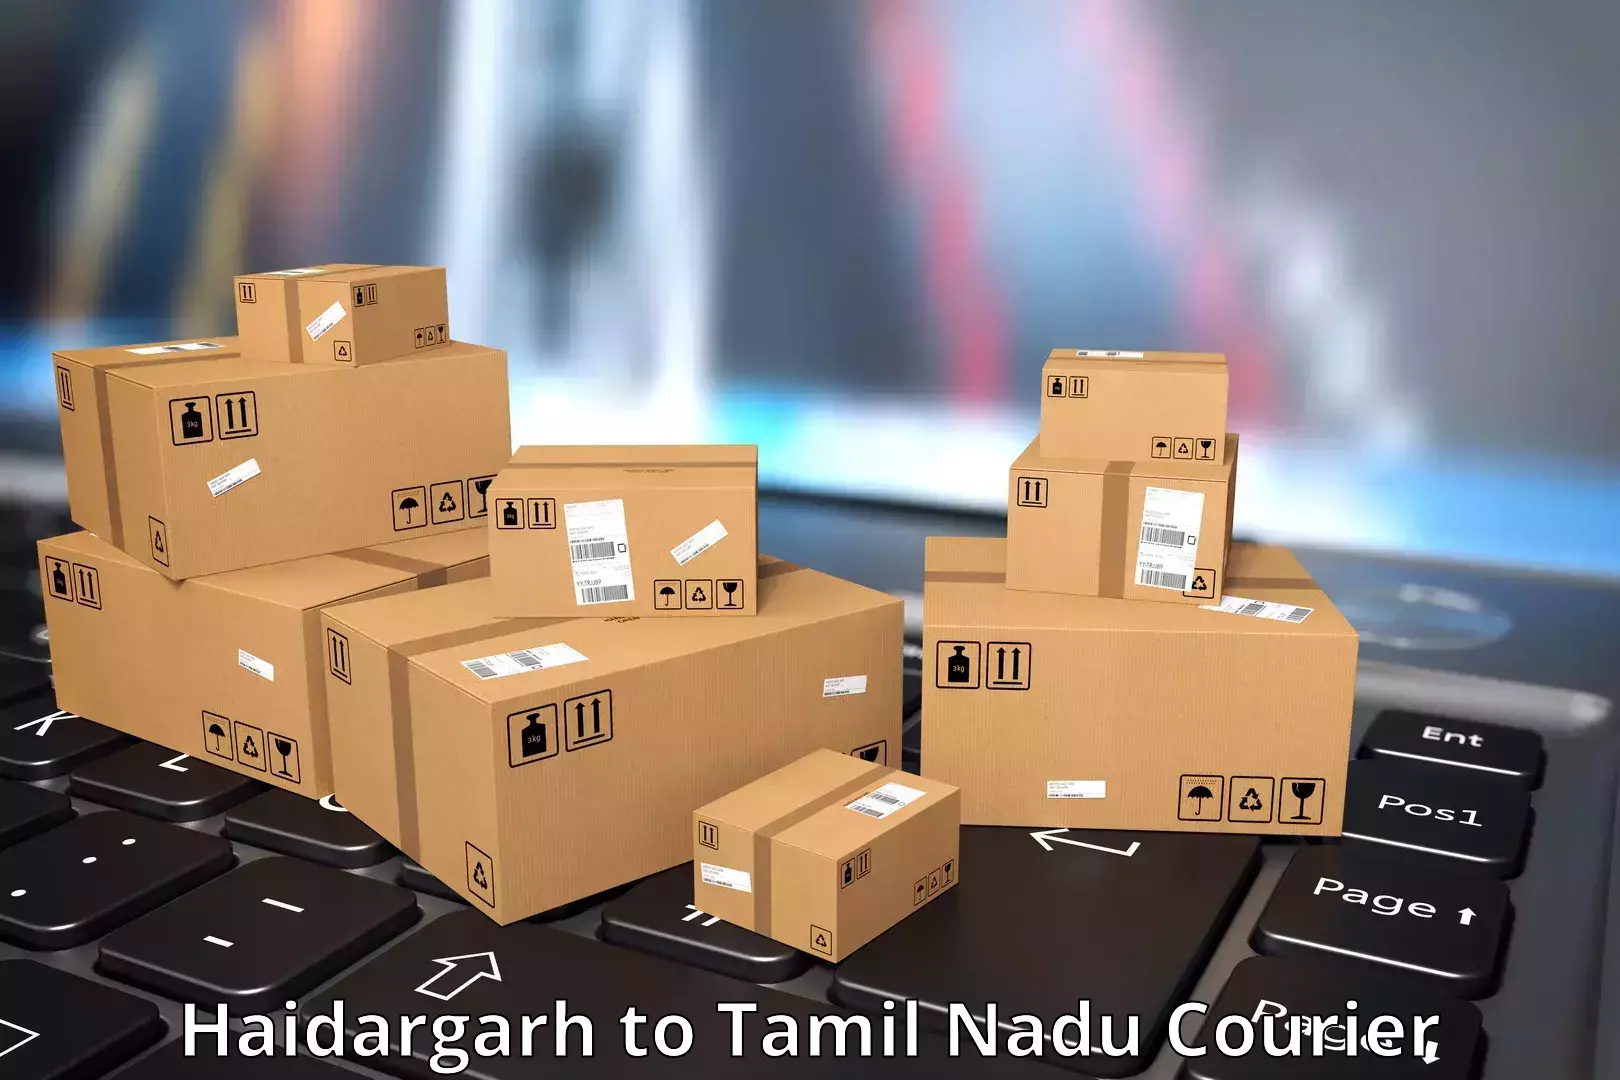 Package tracking Haidargarh to Trichy